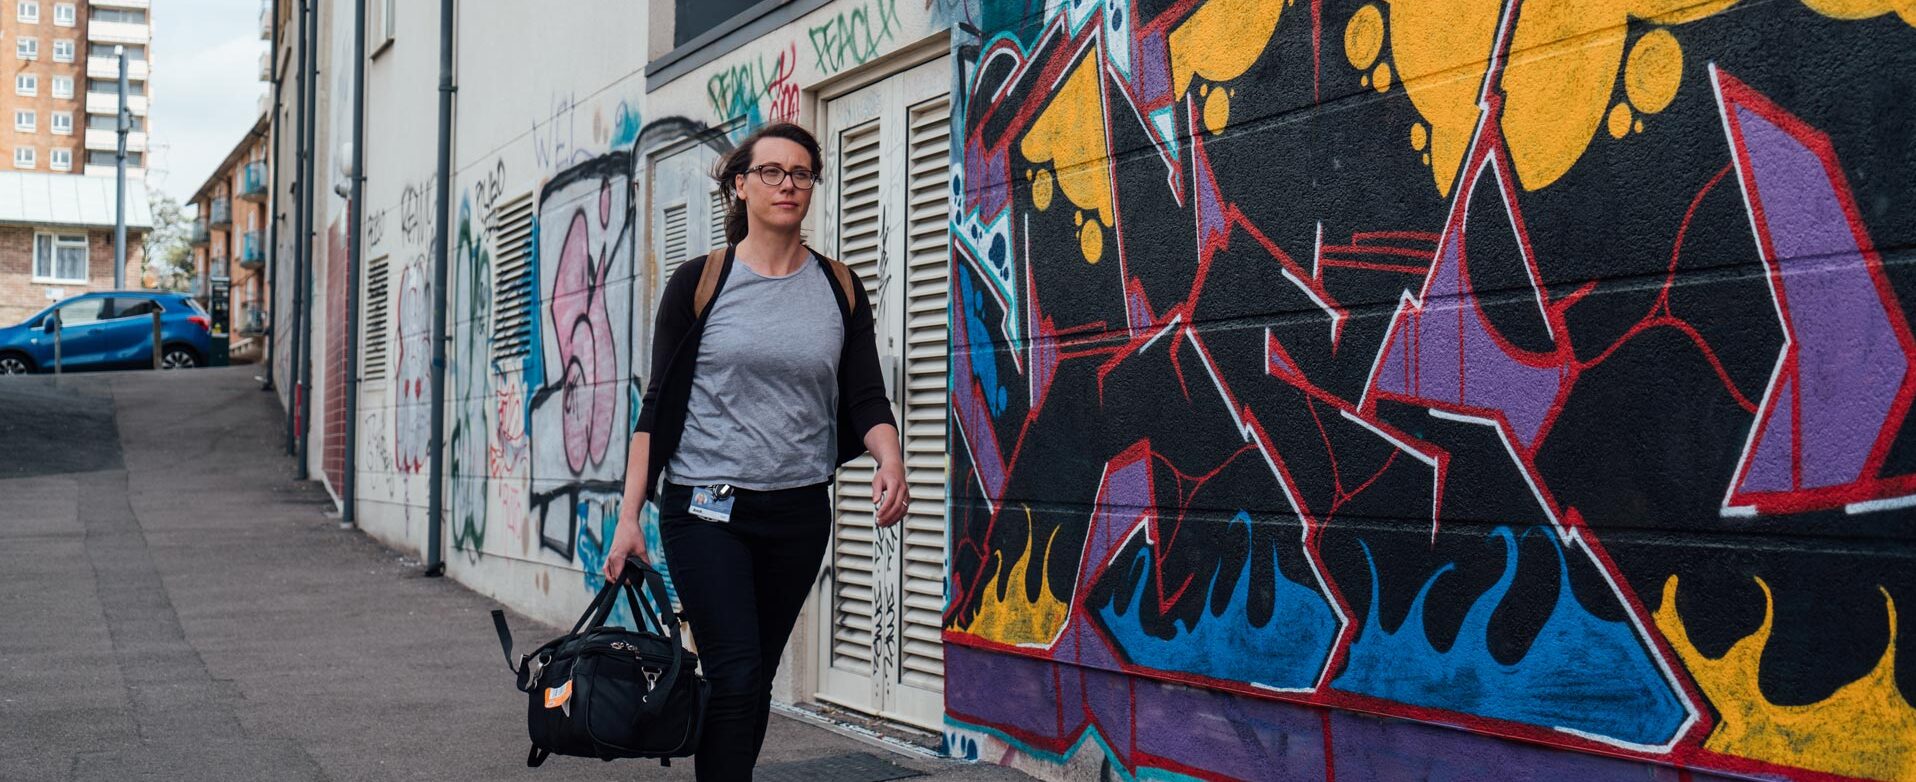 Arch nurse walking past graffitied wall, holding medical bag